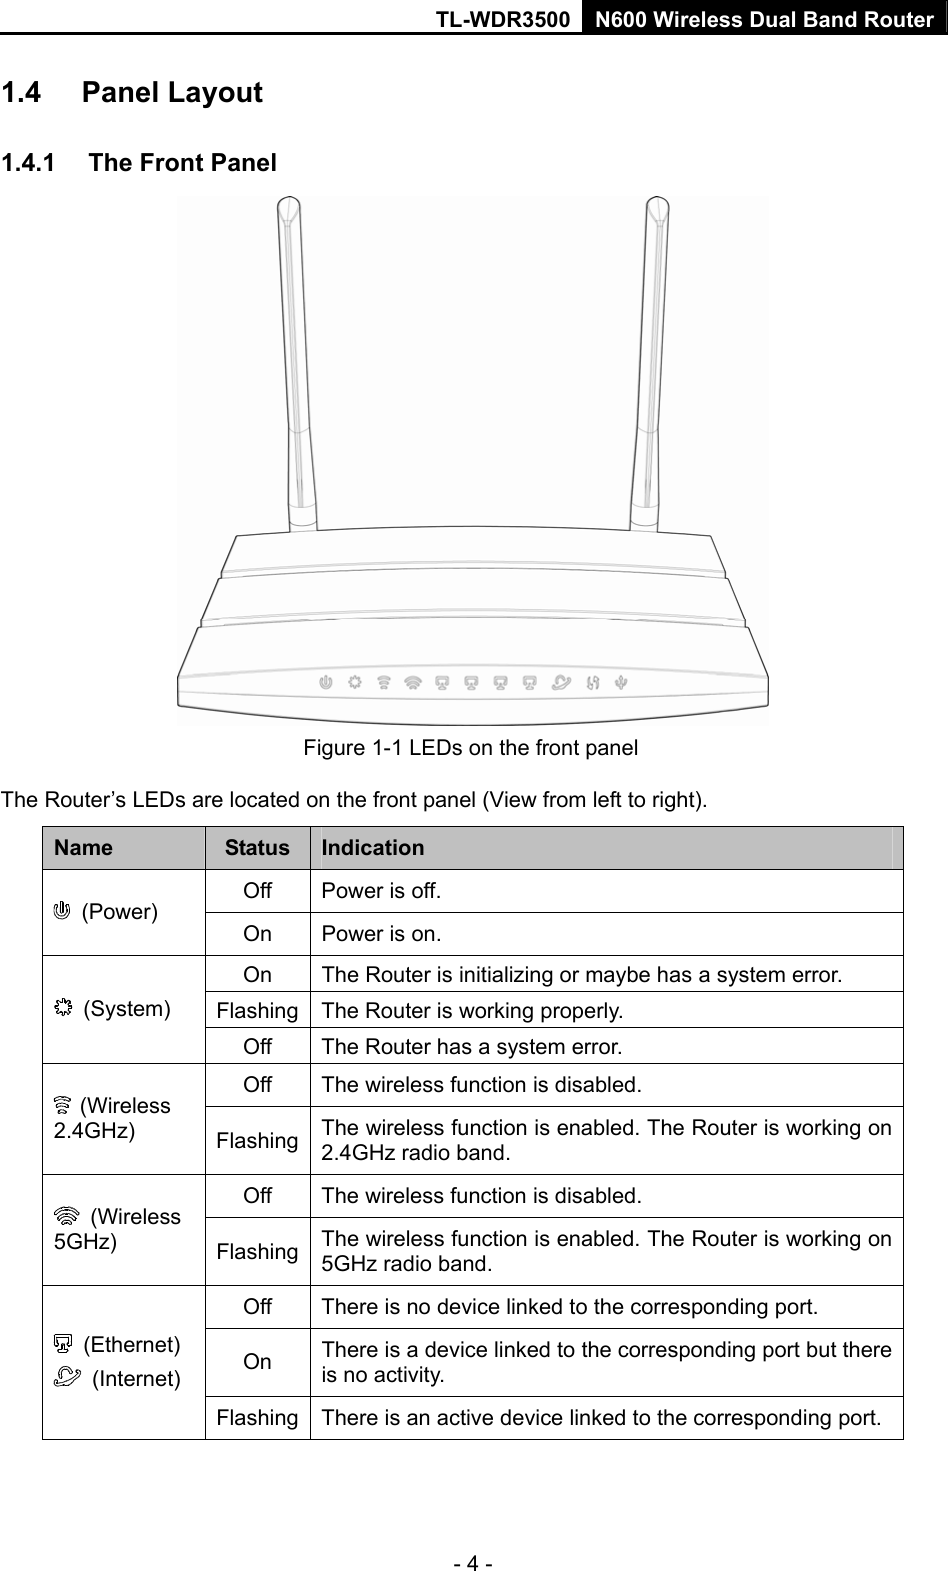 TL-WDR3500 N600 Wireless Dual Band Router - 4 - 1.4  Panel Layout 1.4.1  The Front Panel  Figure 1-1 LEDs on the front panel The Router’s LEDs are located on the front panel (View from left to right).   Name  Status  Indication Off  Power is off.  (Power)  On  Power is on. On  The Router is initializing or maybe has a system error. Flashing  The Router is working properly.  (System) Off  The Router has a system error. Off  The wireless function is disabled.  (Wireless 2.4GHz)  Flashing  The wireless function is enabled. The Router is working on 2.4GHz radio band. Off  The wireless function is disabled.  (Wireless 5GHz)  Flashing  The wireless function is enabled. The Router is working on 5GHz radio band. Off  There is no device linked to the corresponding port. On  There is a device linked to the corresponding port but there is no activity.  (Ethernet)  (Internet) Flashing  There is an active device linked to the corresponding port. 